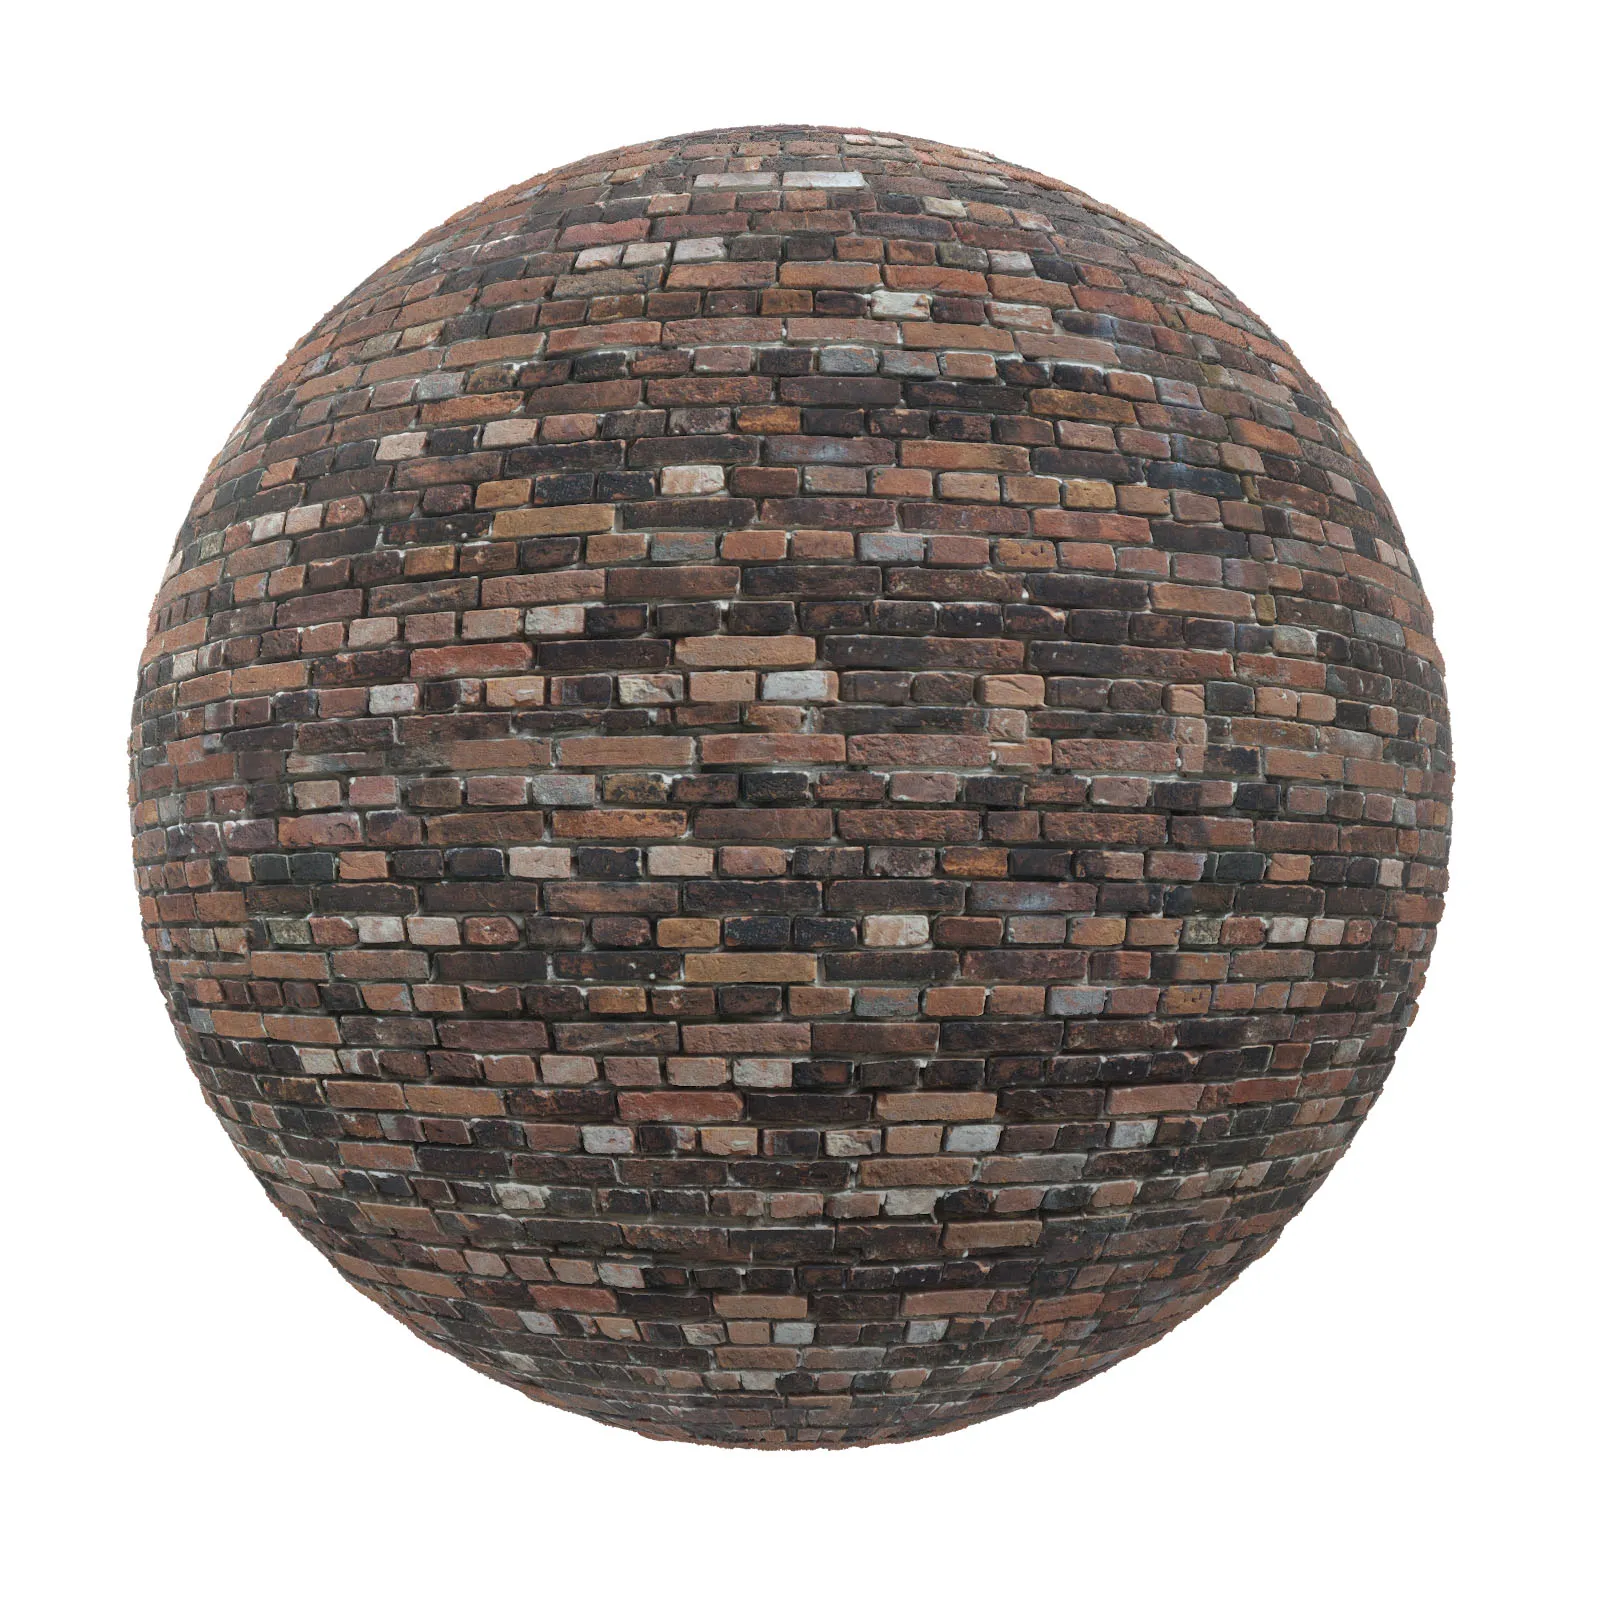 PBR CGAXIS TEXTURES – BRICK – Red And Black Brick Wall 2